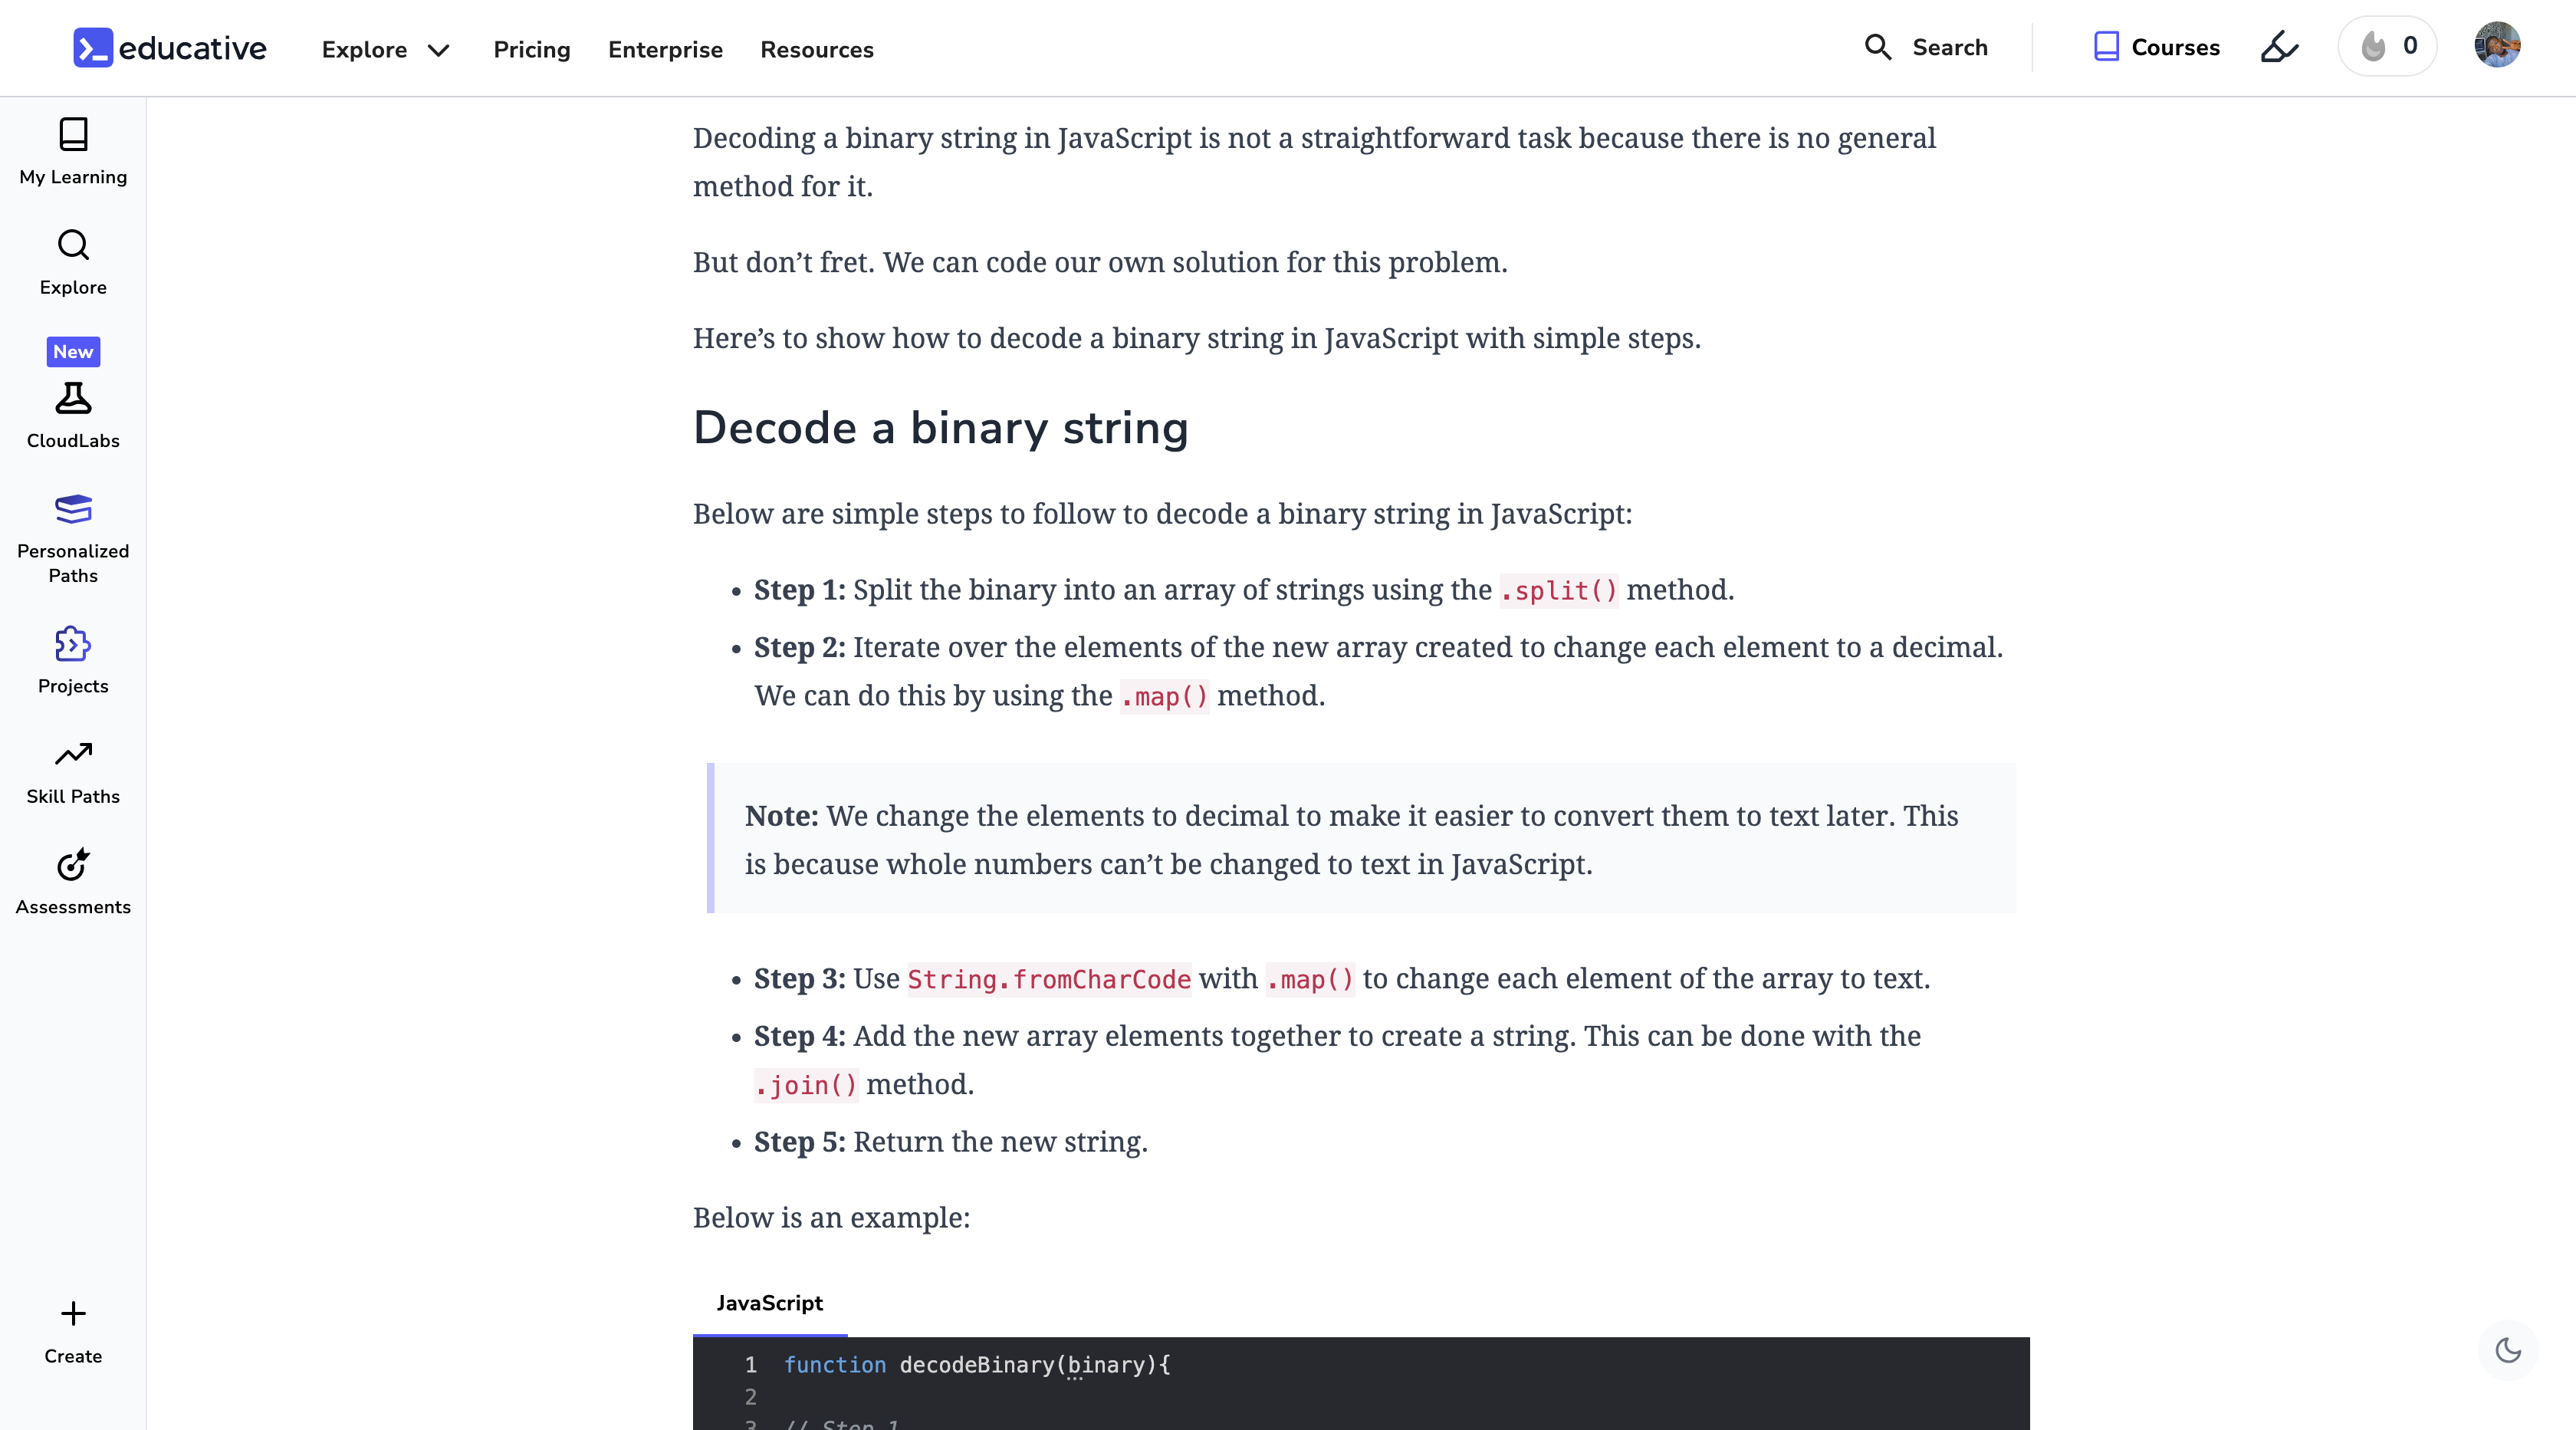 How to decode a binary string in JavaScript